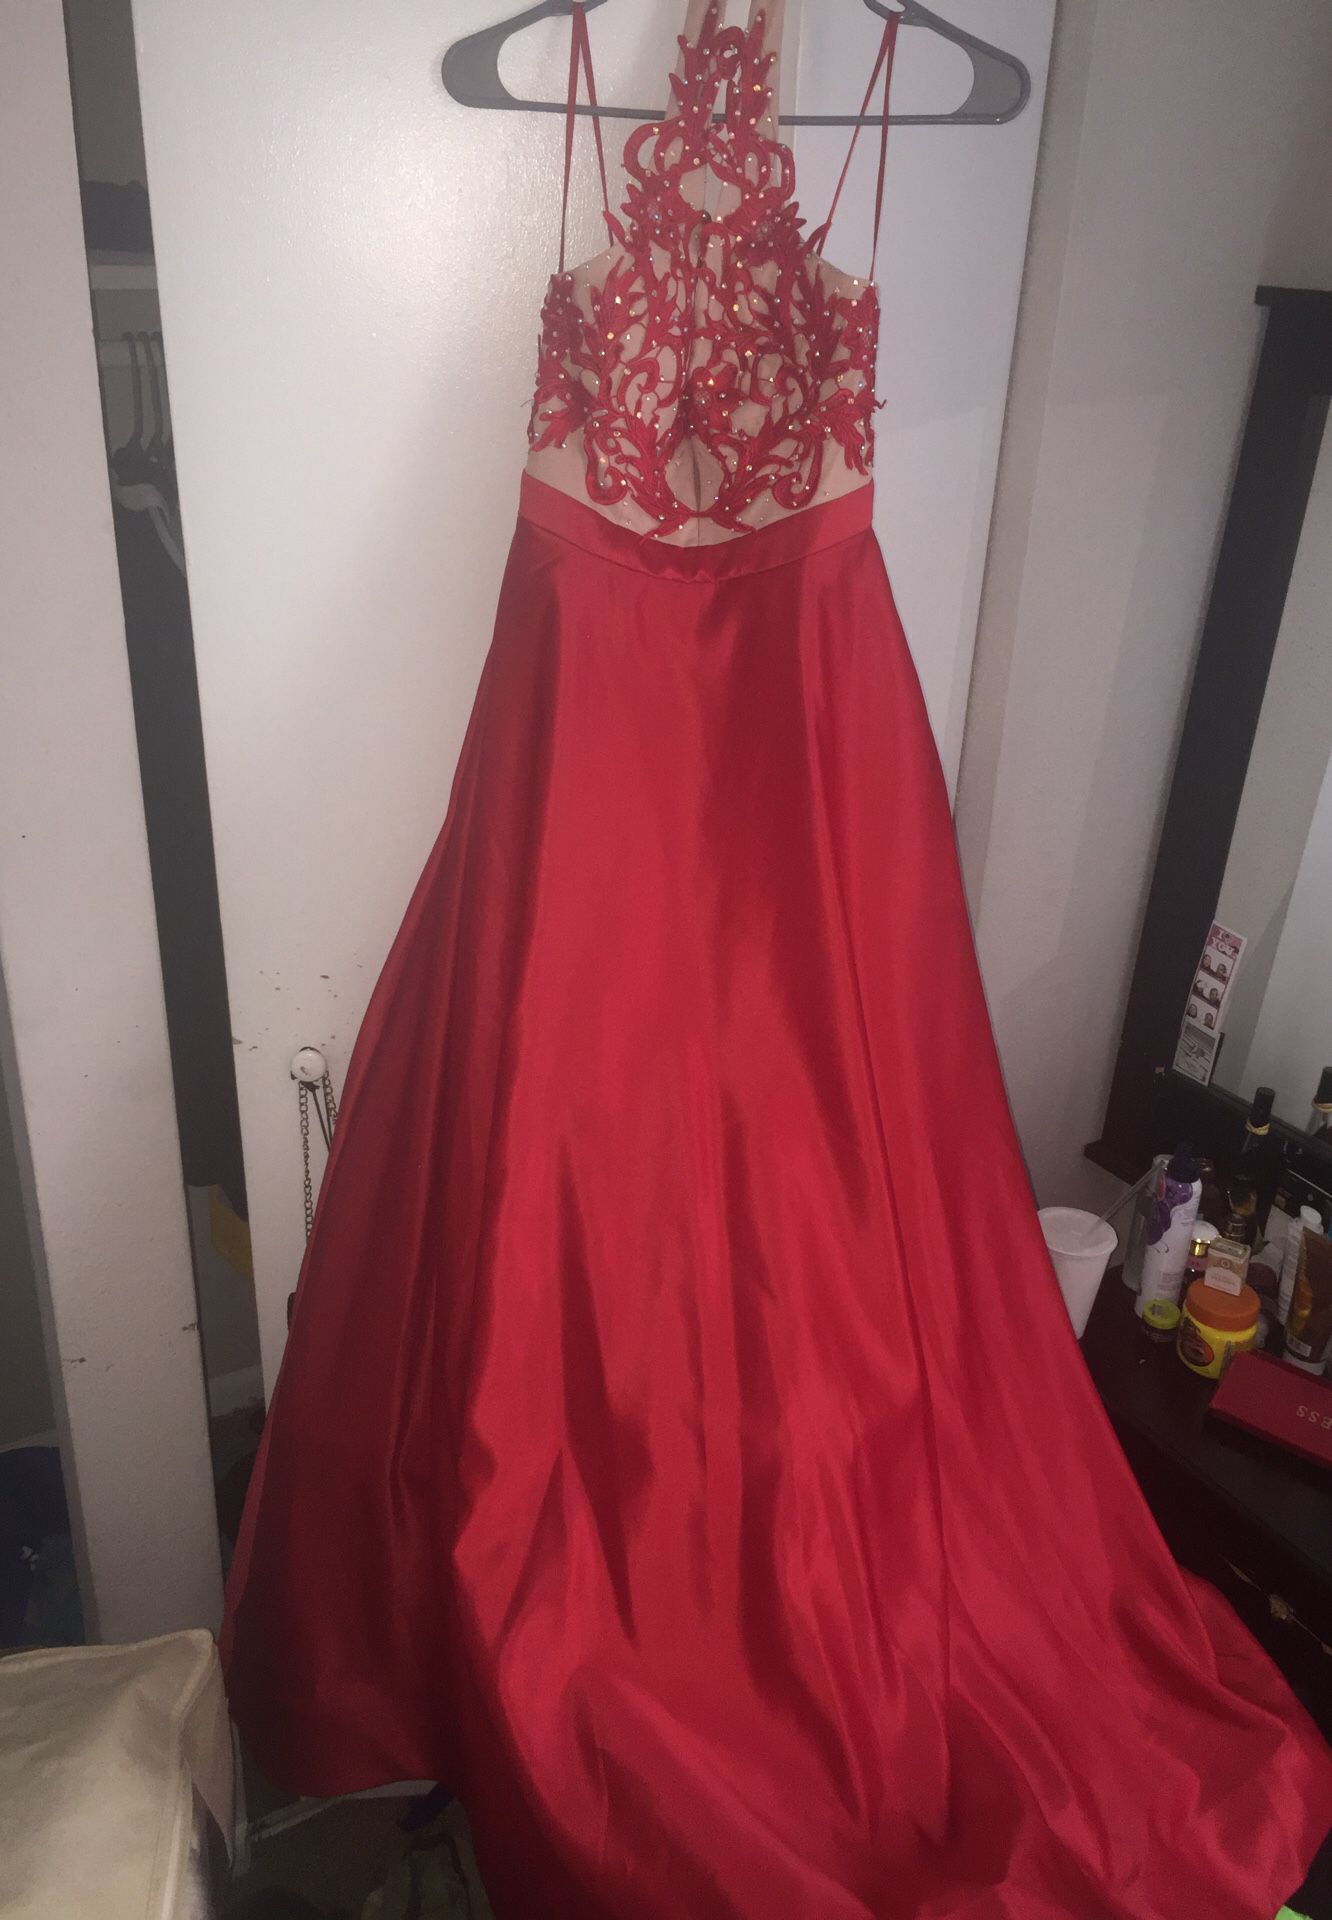 Strapless Backless Red Prom Dress